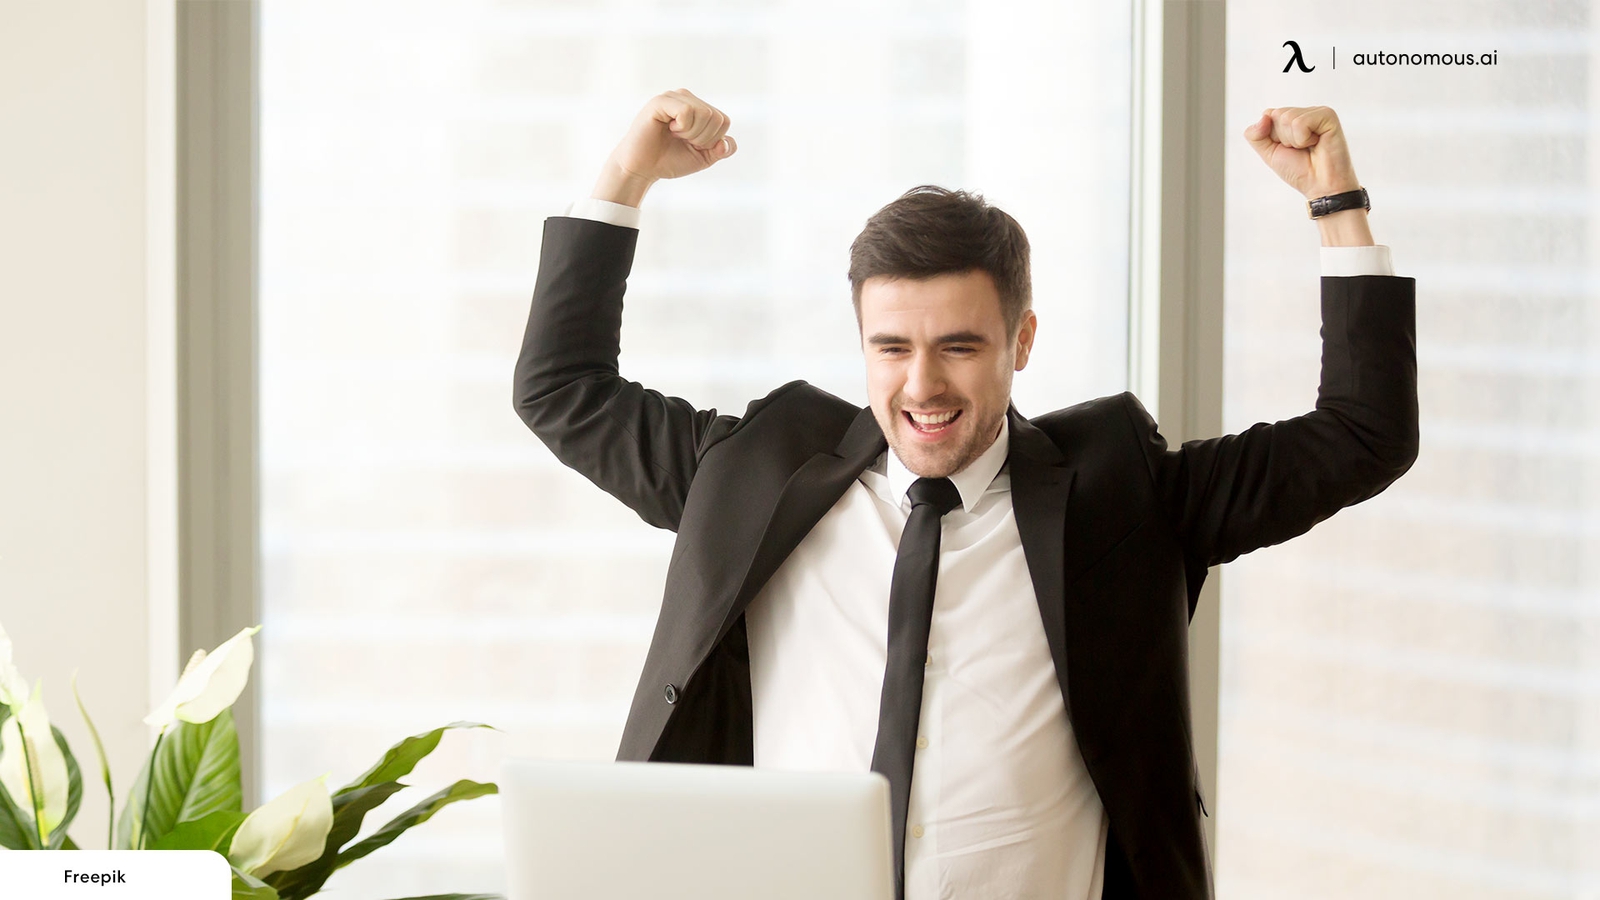 15 Helpful Ways to Lift Your Mood at Work